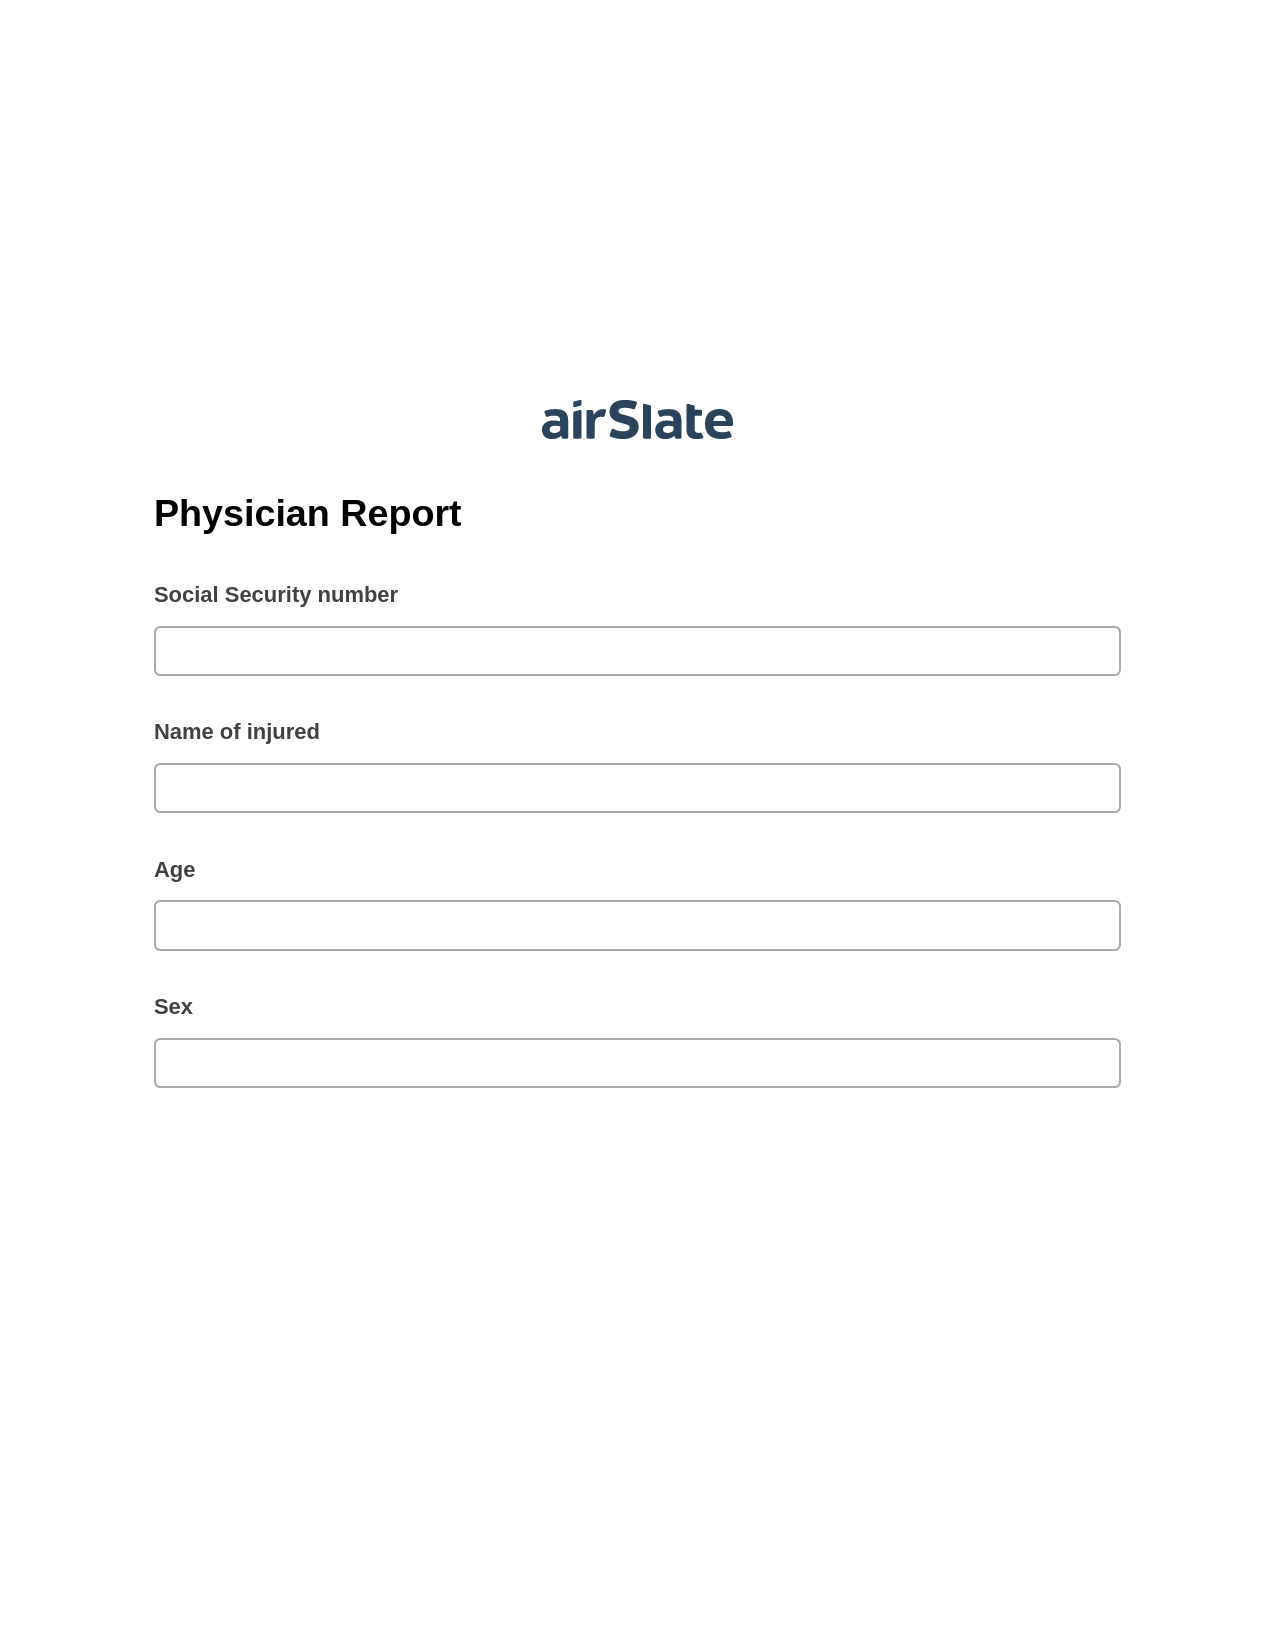 Physician Report Pre-fill from Salesforce Records Bot, Lock the Slate Bot, Archive to SharePoint Folder Bot